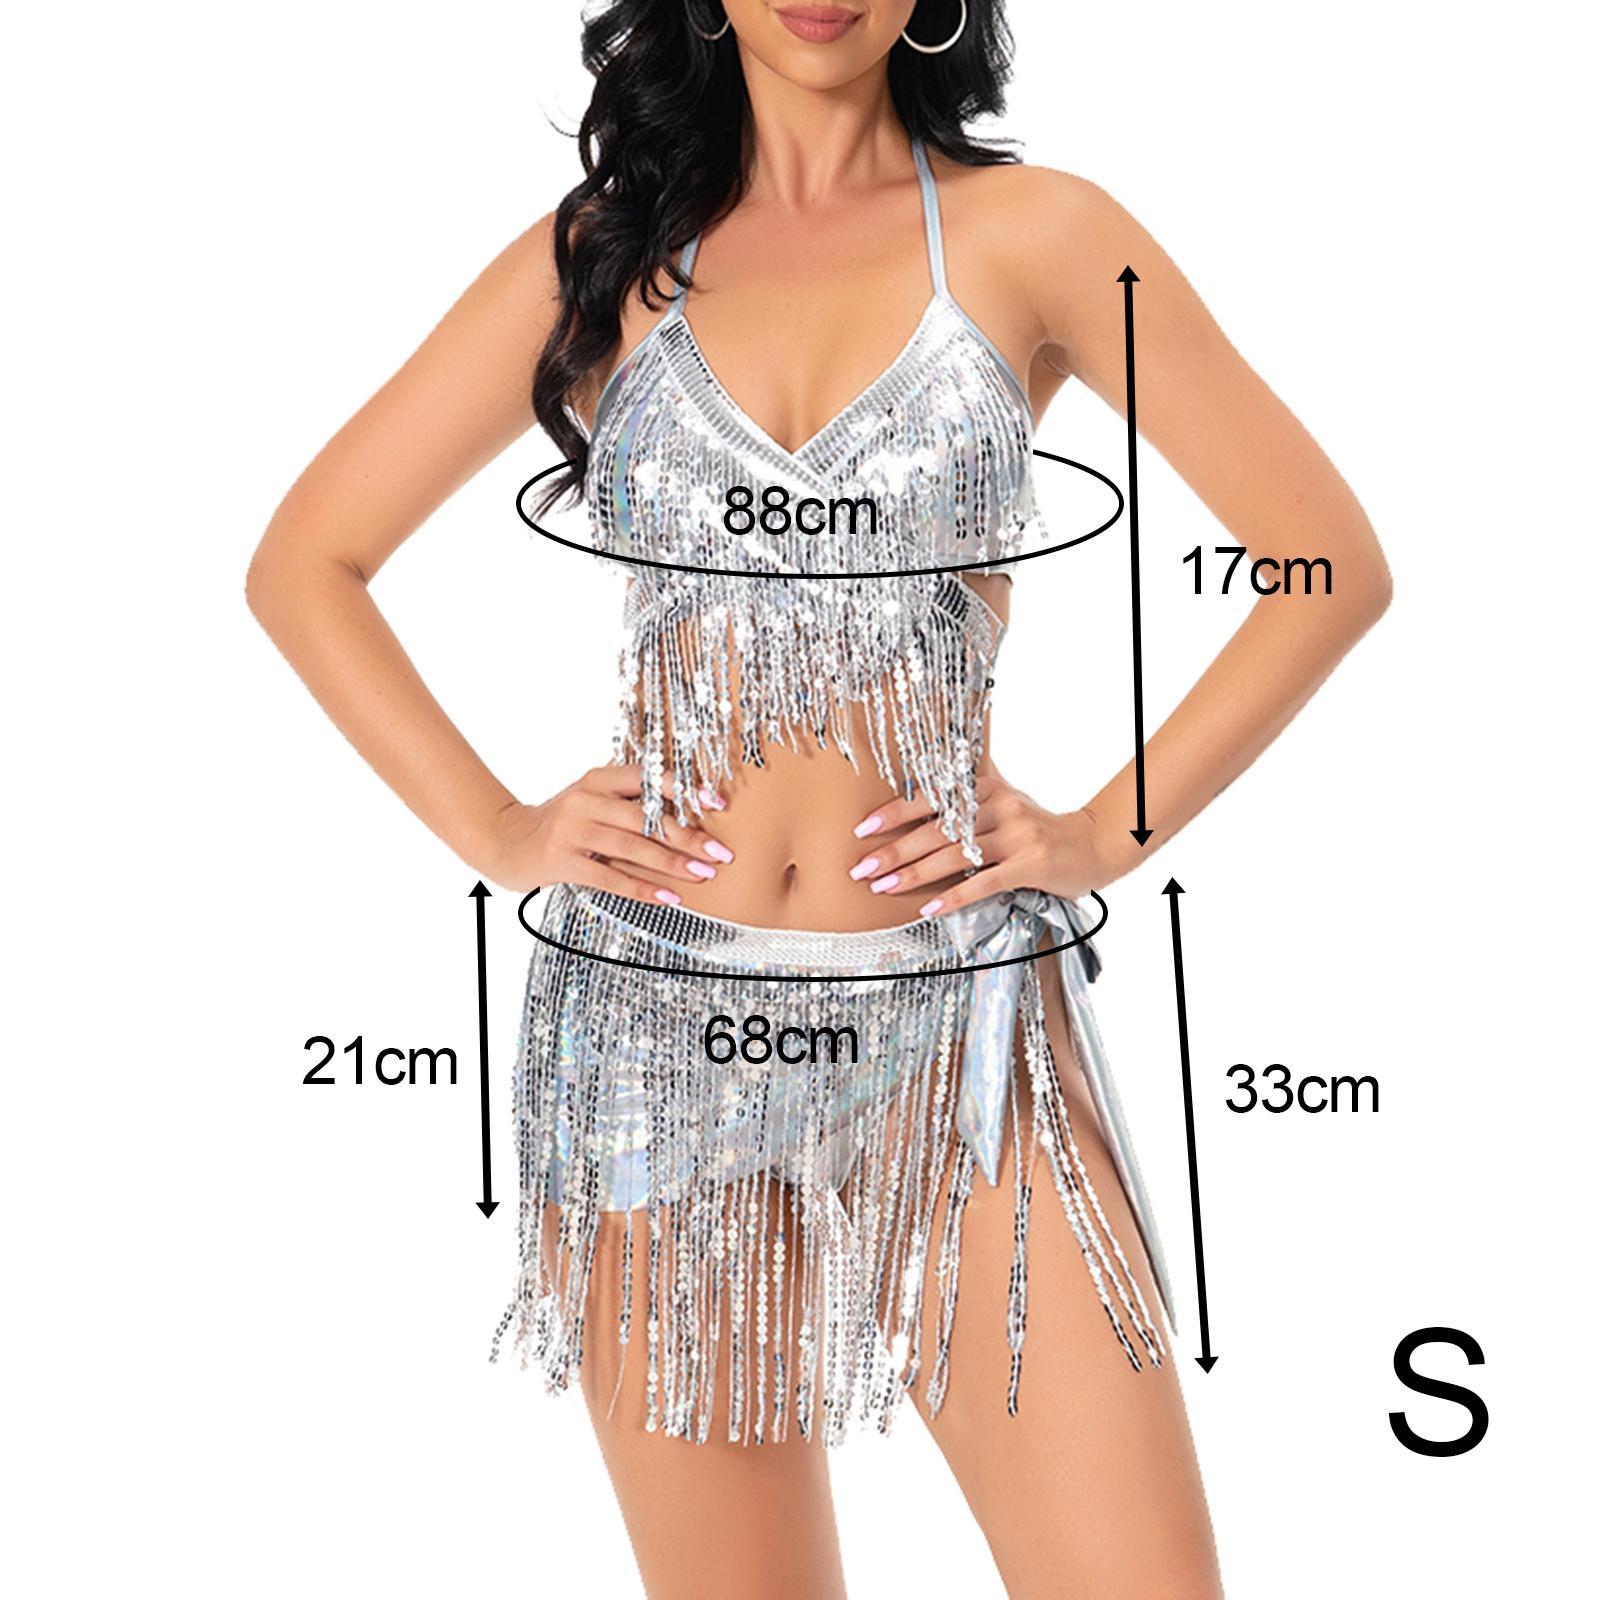 Sequin Tassel Set 3 Piece Outfit for Costume Accessories Party Samba